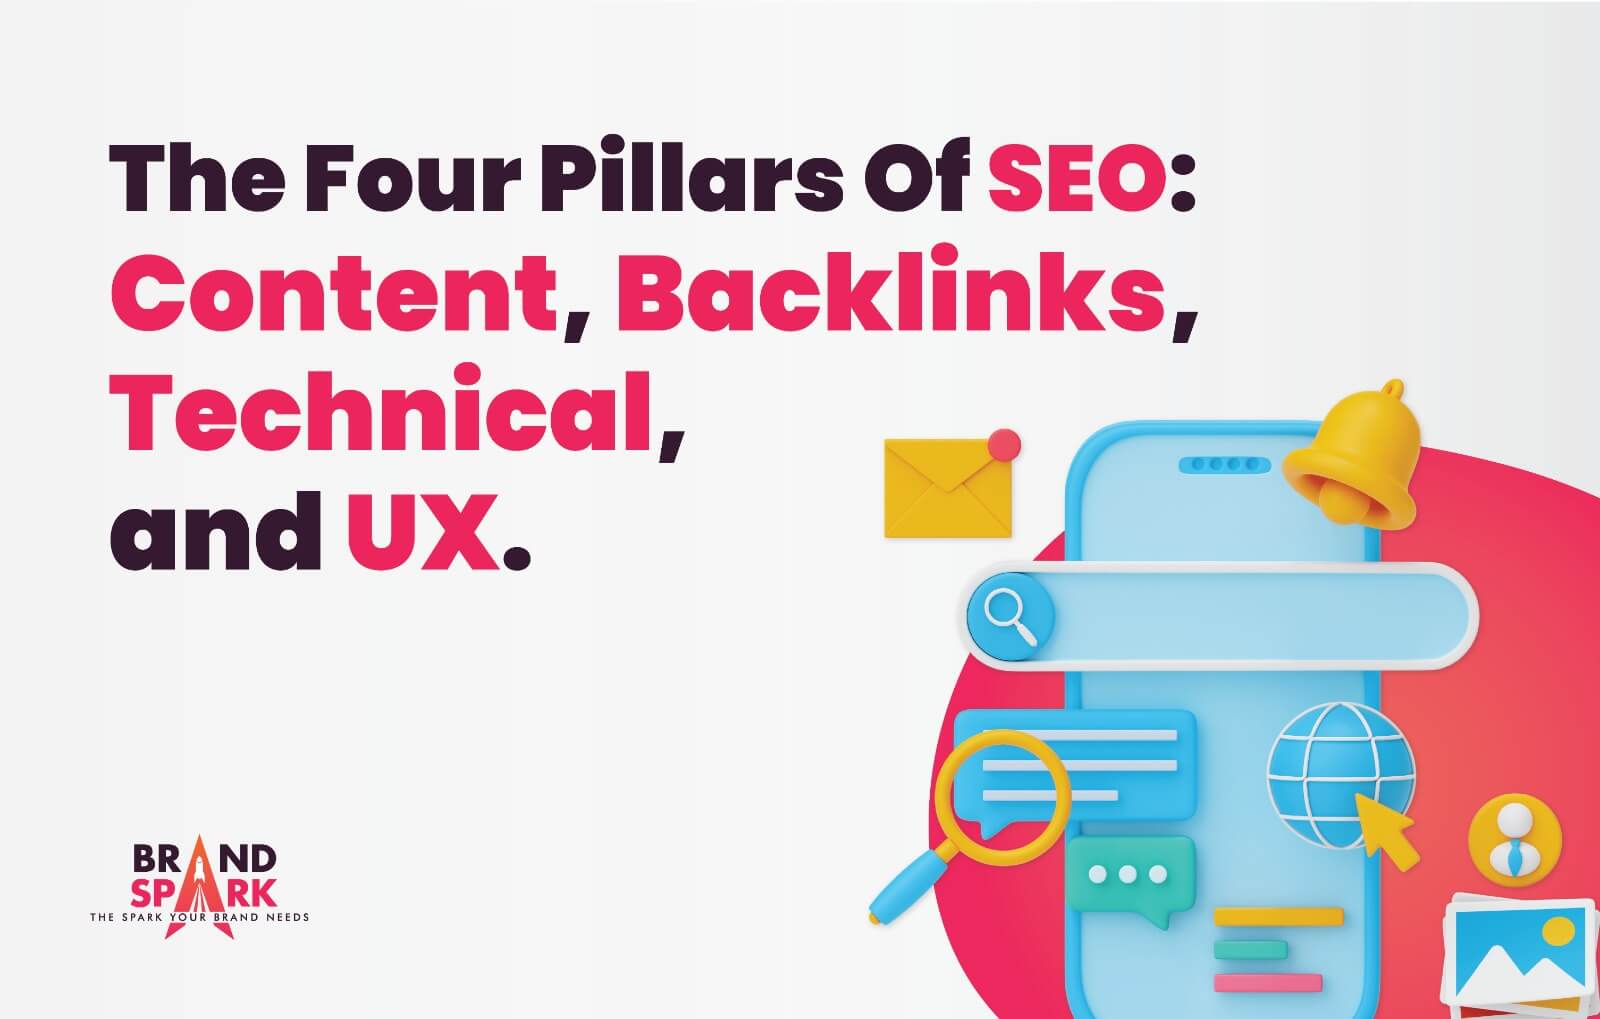 The Four Pillars of SEO: Content, Backlinks, Technical, and UX